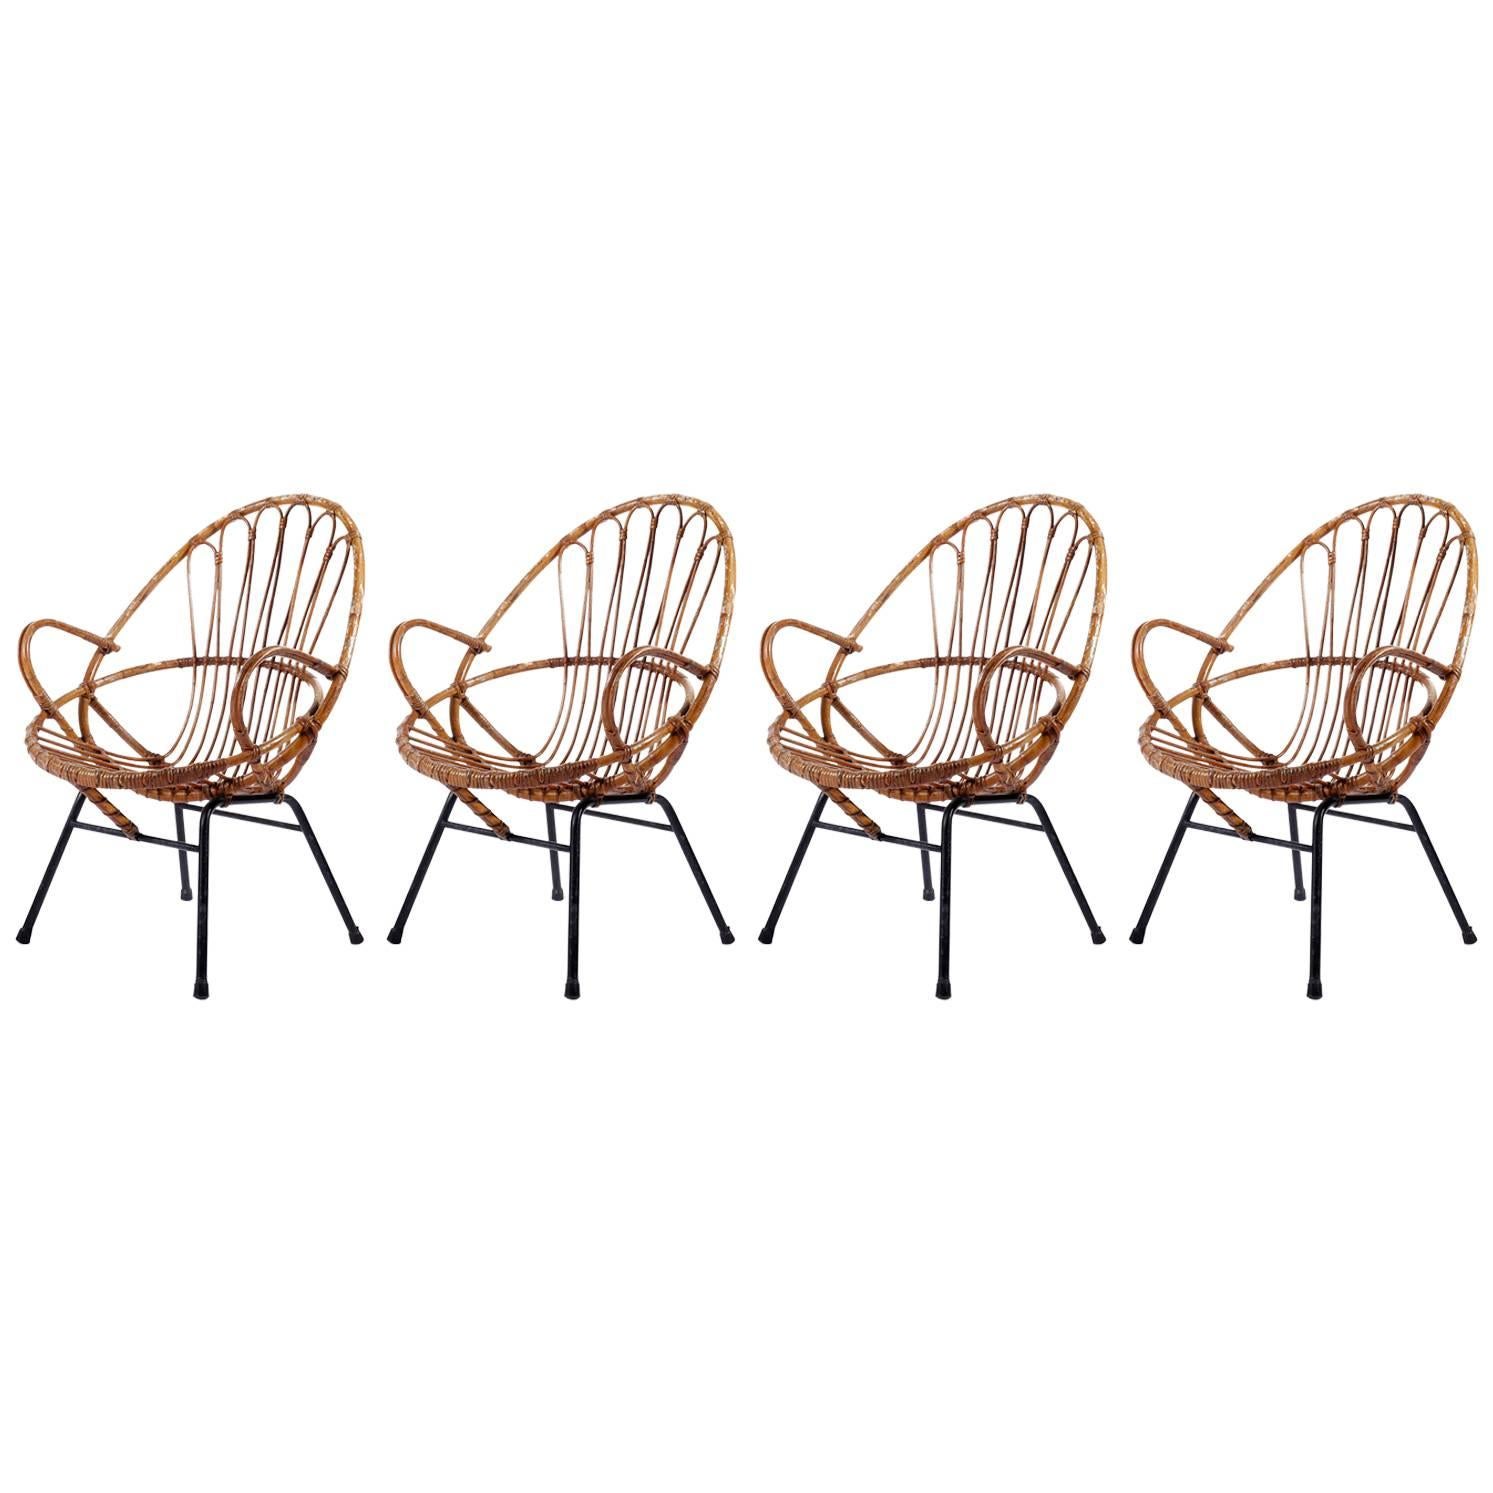 Four Rattan Wicker Bamboo Chairs Armchairs, Rohe Noordwolde, Netherlands, 1960s